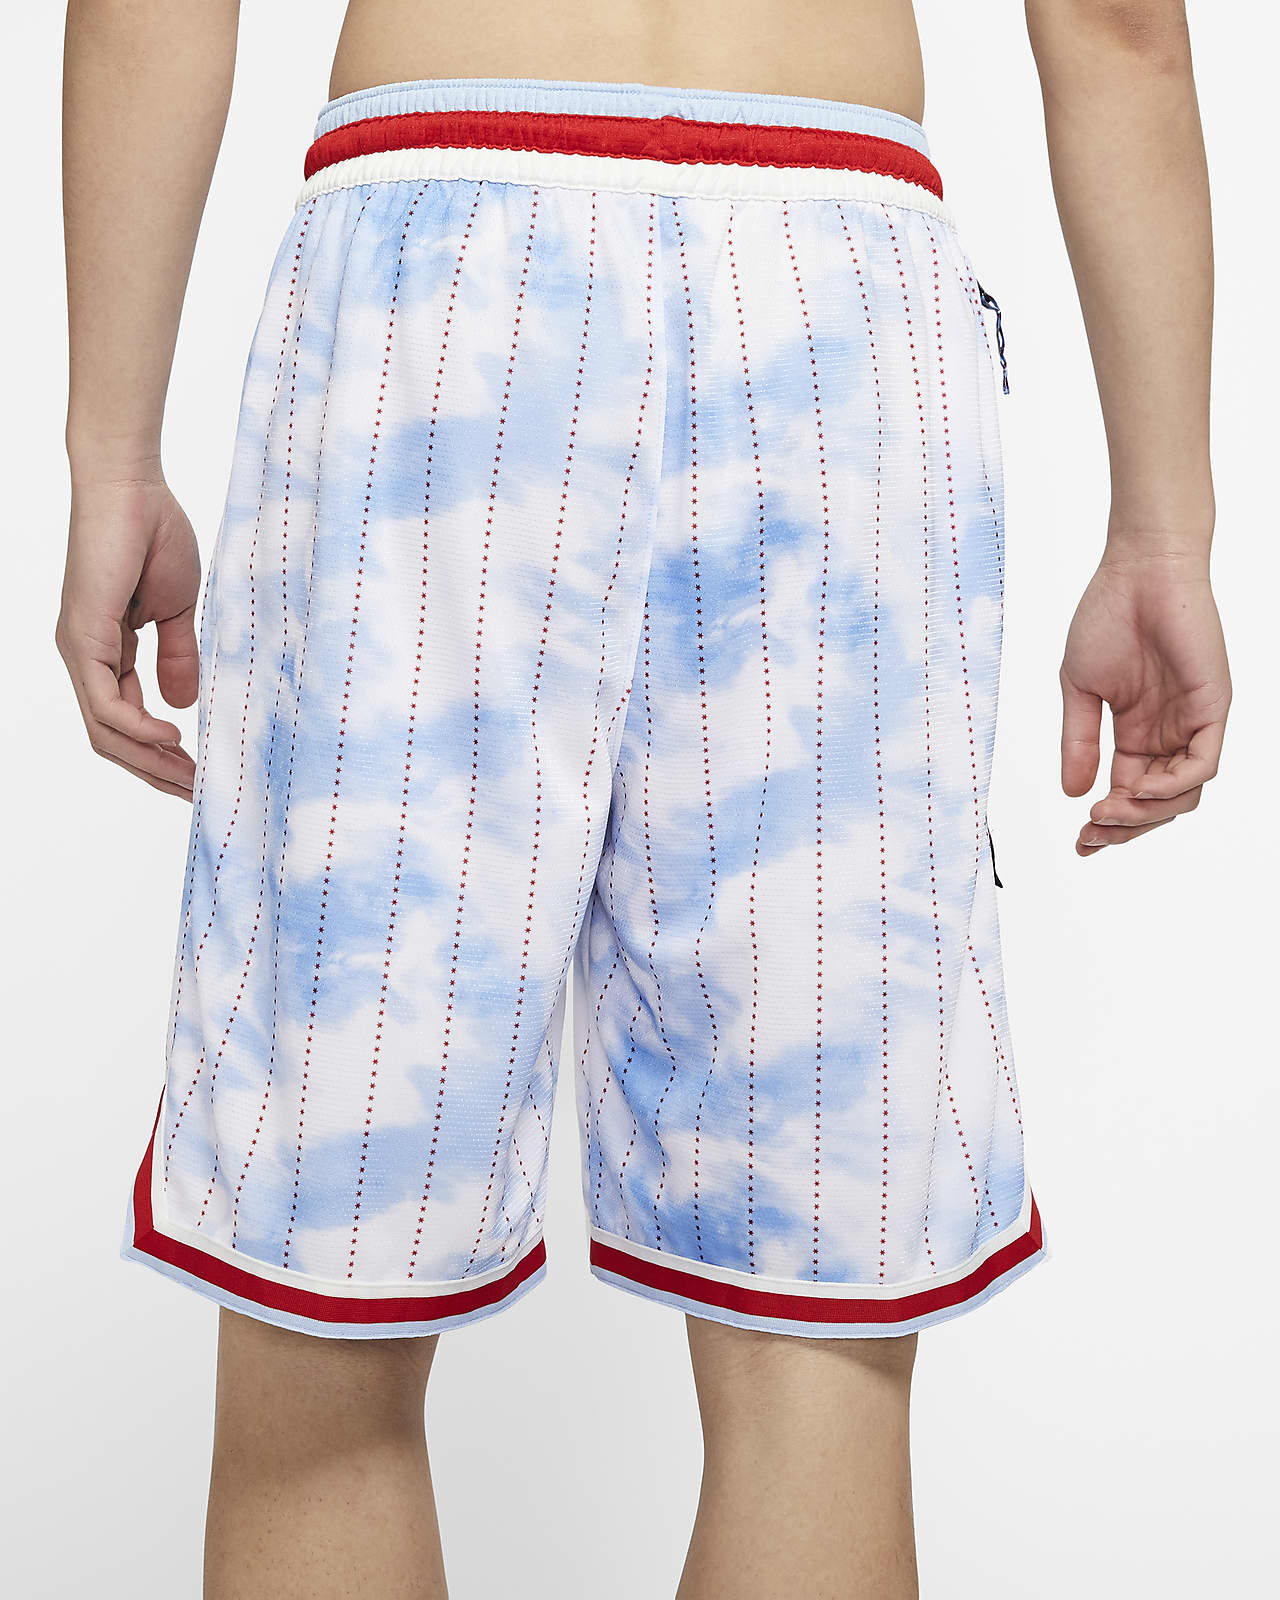 Nike Dri-FIT DNA+ Basketball Shorts – DTLR